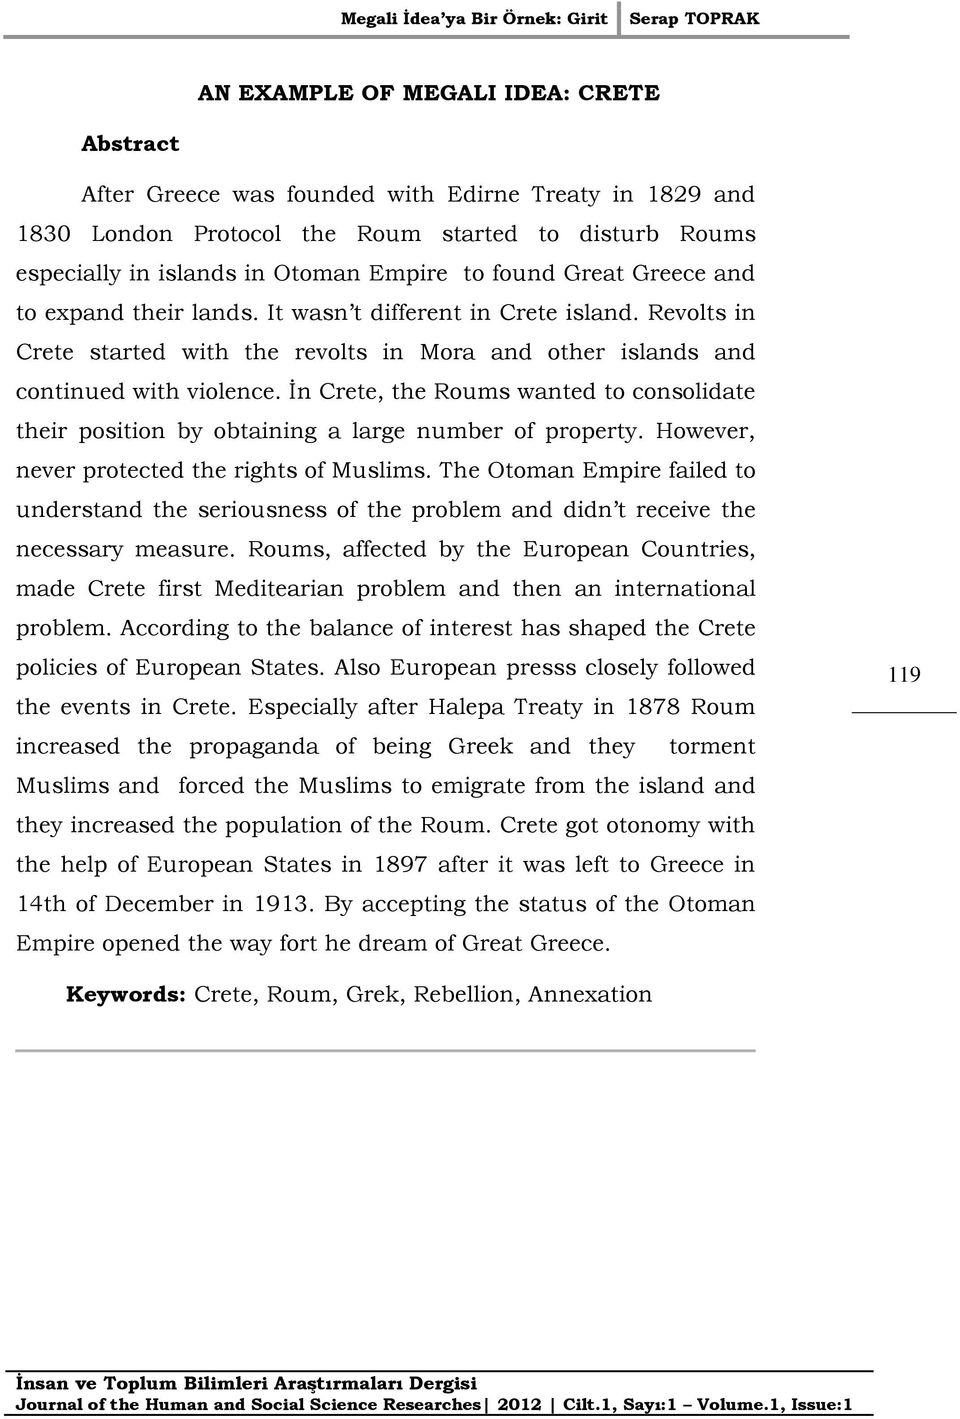 İn Crete, the Roums wanted to consolidate their position by obtaining a large number of property. However, never protected the rights of Muslims.